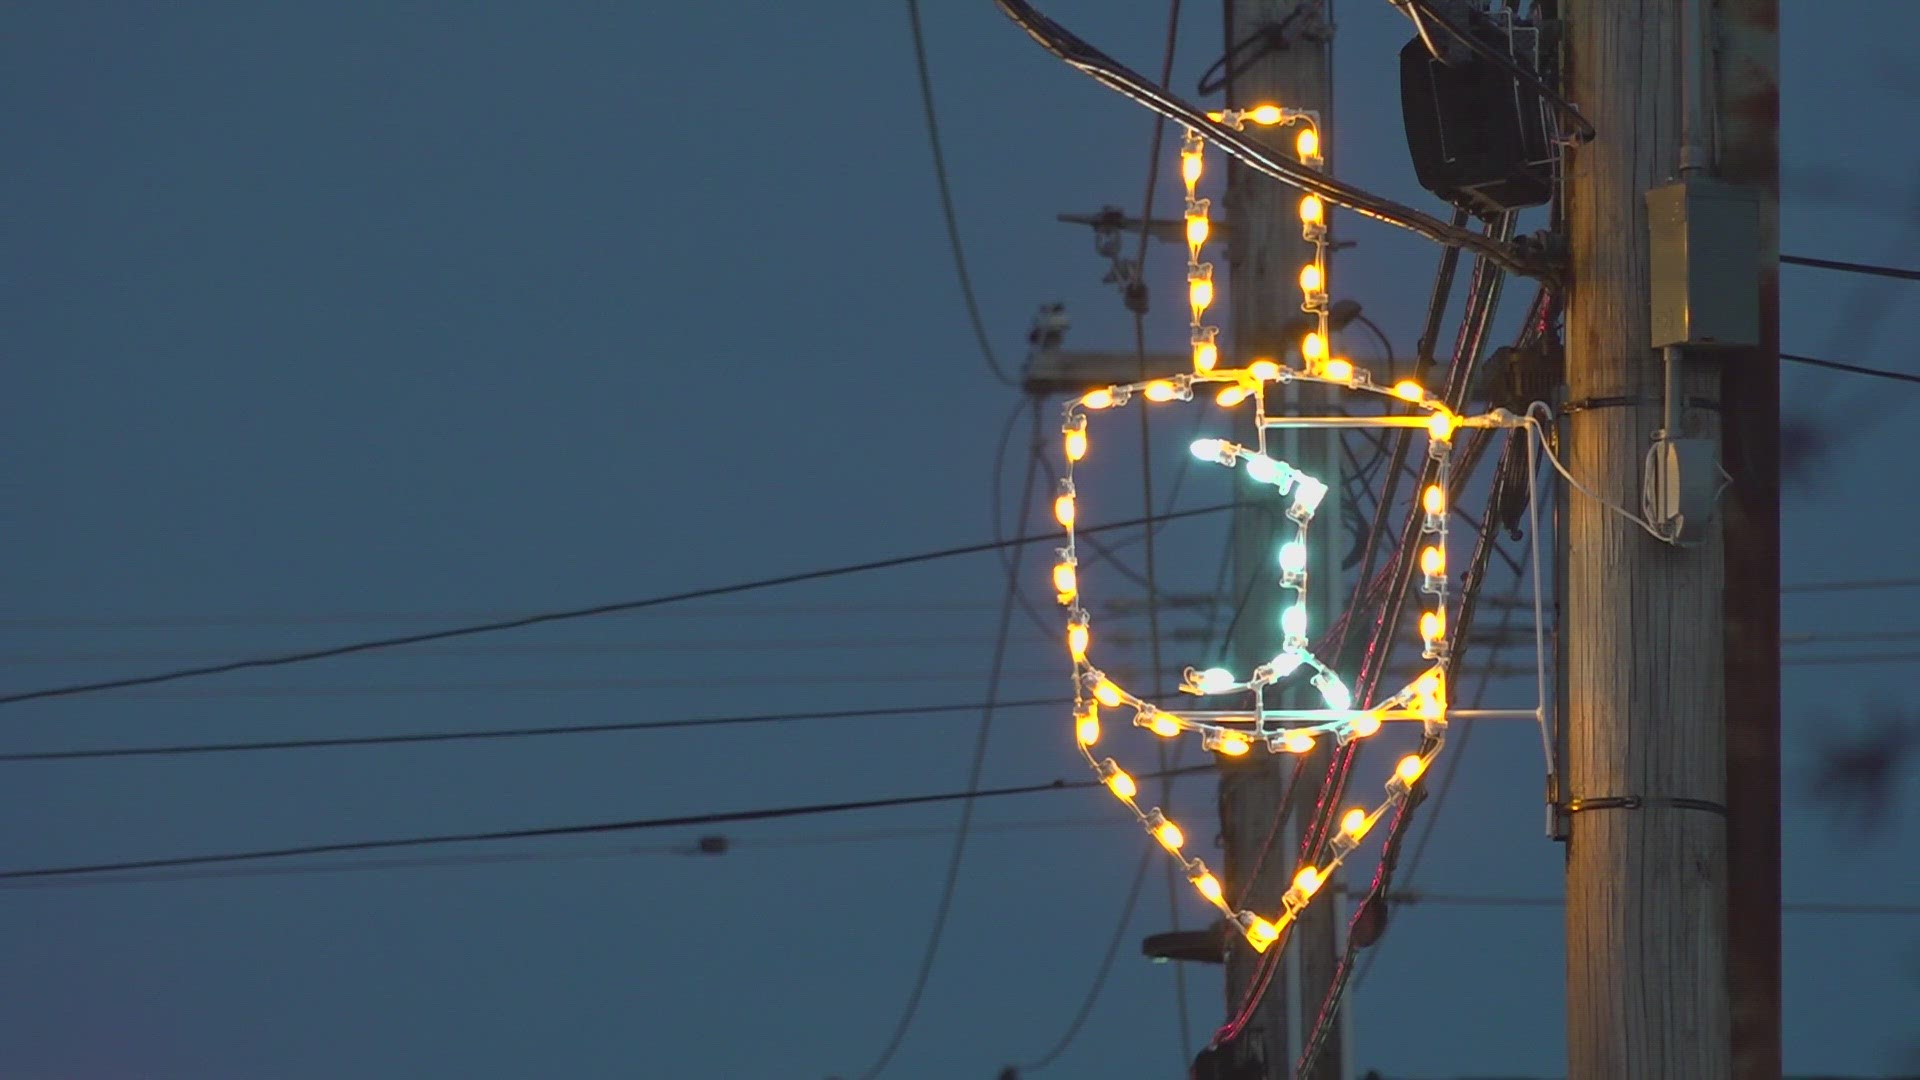 The city replaced the star with a dreidel following complaints from Arab American residents.